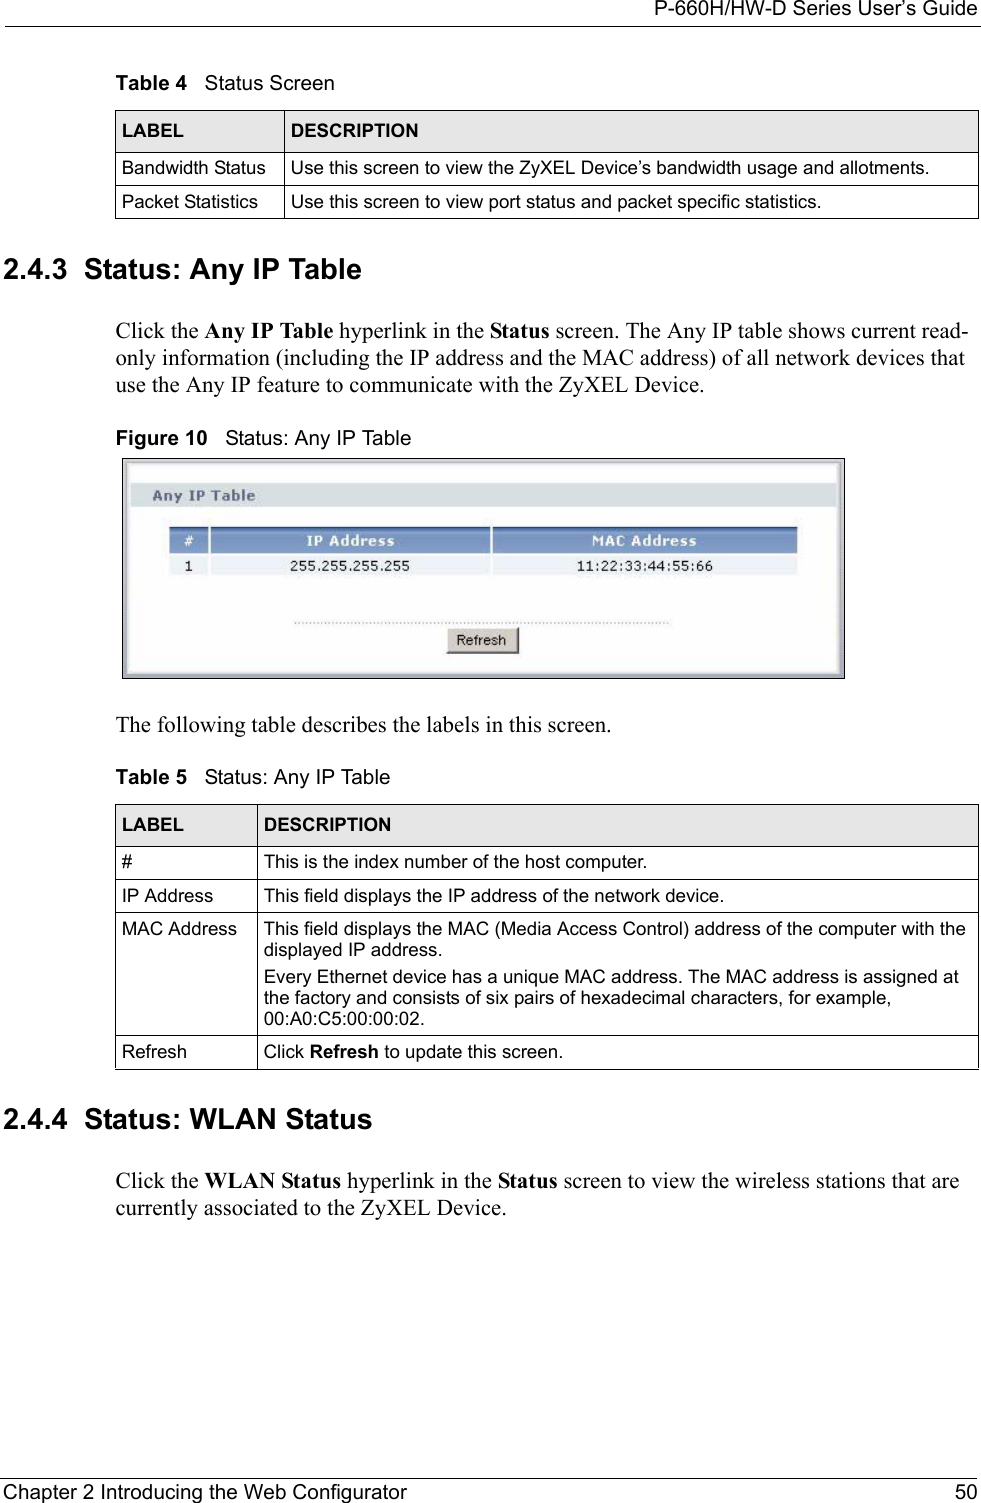 P-660H/HW-D Series User’s GuideChapter 2 Introducing the Web Configurator 502.4.3  Status: Any IP TableClick the Any IP Table hyperlink in the Status screen. The Any IP table shows current read-only information (including the IP address and the MAC address) of all network devices that use the Any IP feature to communicate with the ZyXEL Device.Figure 10   Status: Any IP TableThe following table describes the labels in this screen.2.4.4  Status: WLAN StatusClick the WLAN Status hyperlink in the Status screen to view the wireless stations that are currently associated to the ZyXEL Device.Bandwidth Status Use this screen to view the ZyXEL Device’s bandwidth usage and allotments.Packet Statistics Use this screen to view port status and packet specific statistics.Table 4   Status ScreenLABEL DESCRIPTIONTable 5   Status: Any IP TableLABEL  DESCRIPTION#  This is the index number of the host computer. IP Address This field displays the IP address of the network device.MAC Address This field displays the MAC (Media Access Control) address of the computer with the displayed IP address.Every Ethernet device has a unique MAC address. The MAC address is assigned at the factory and consists of six pairs of hexadecimal characters, for example, 00:A0:C5:00:00:02.Refresh Click Refresh to update this screen.